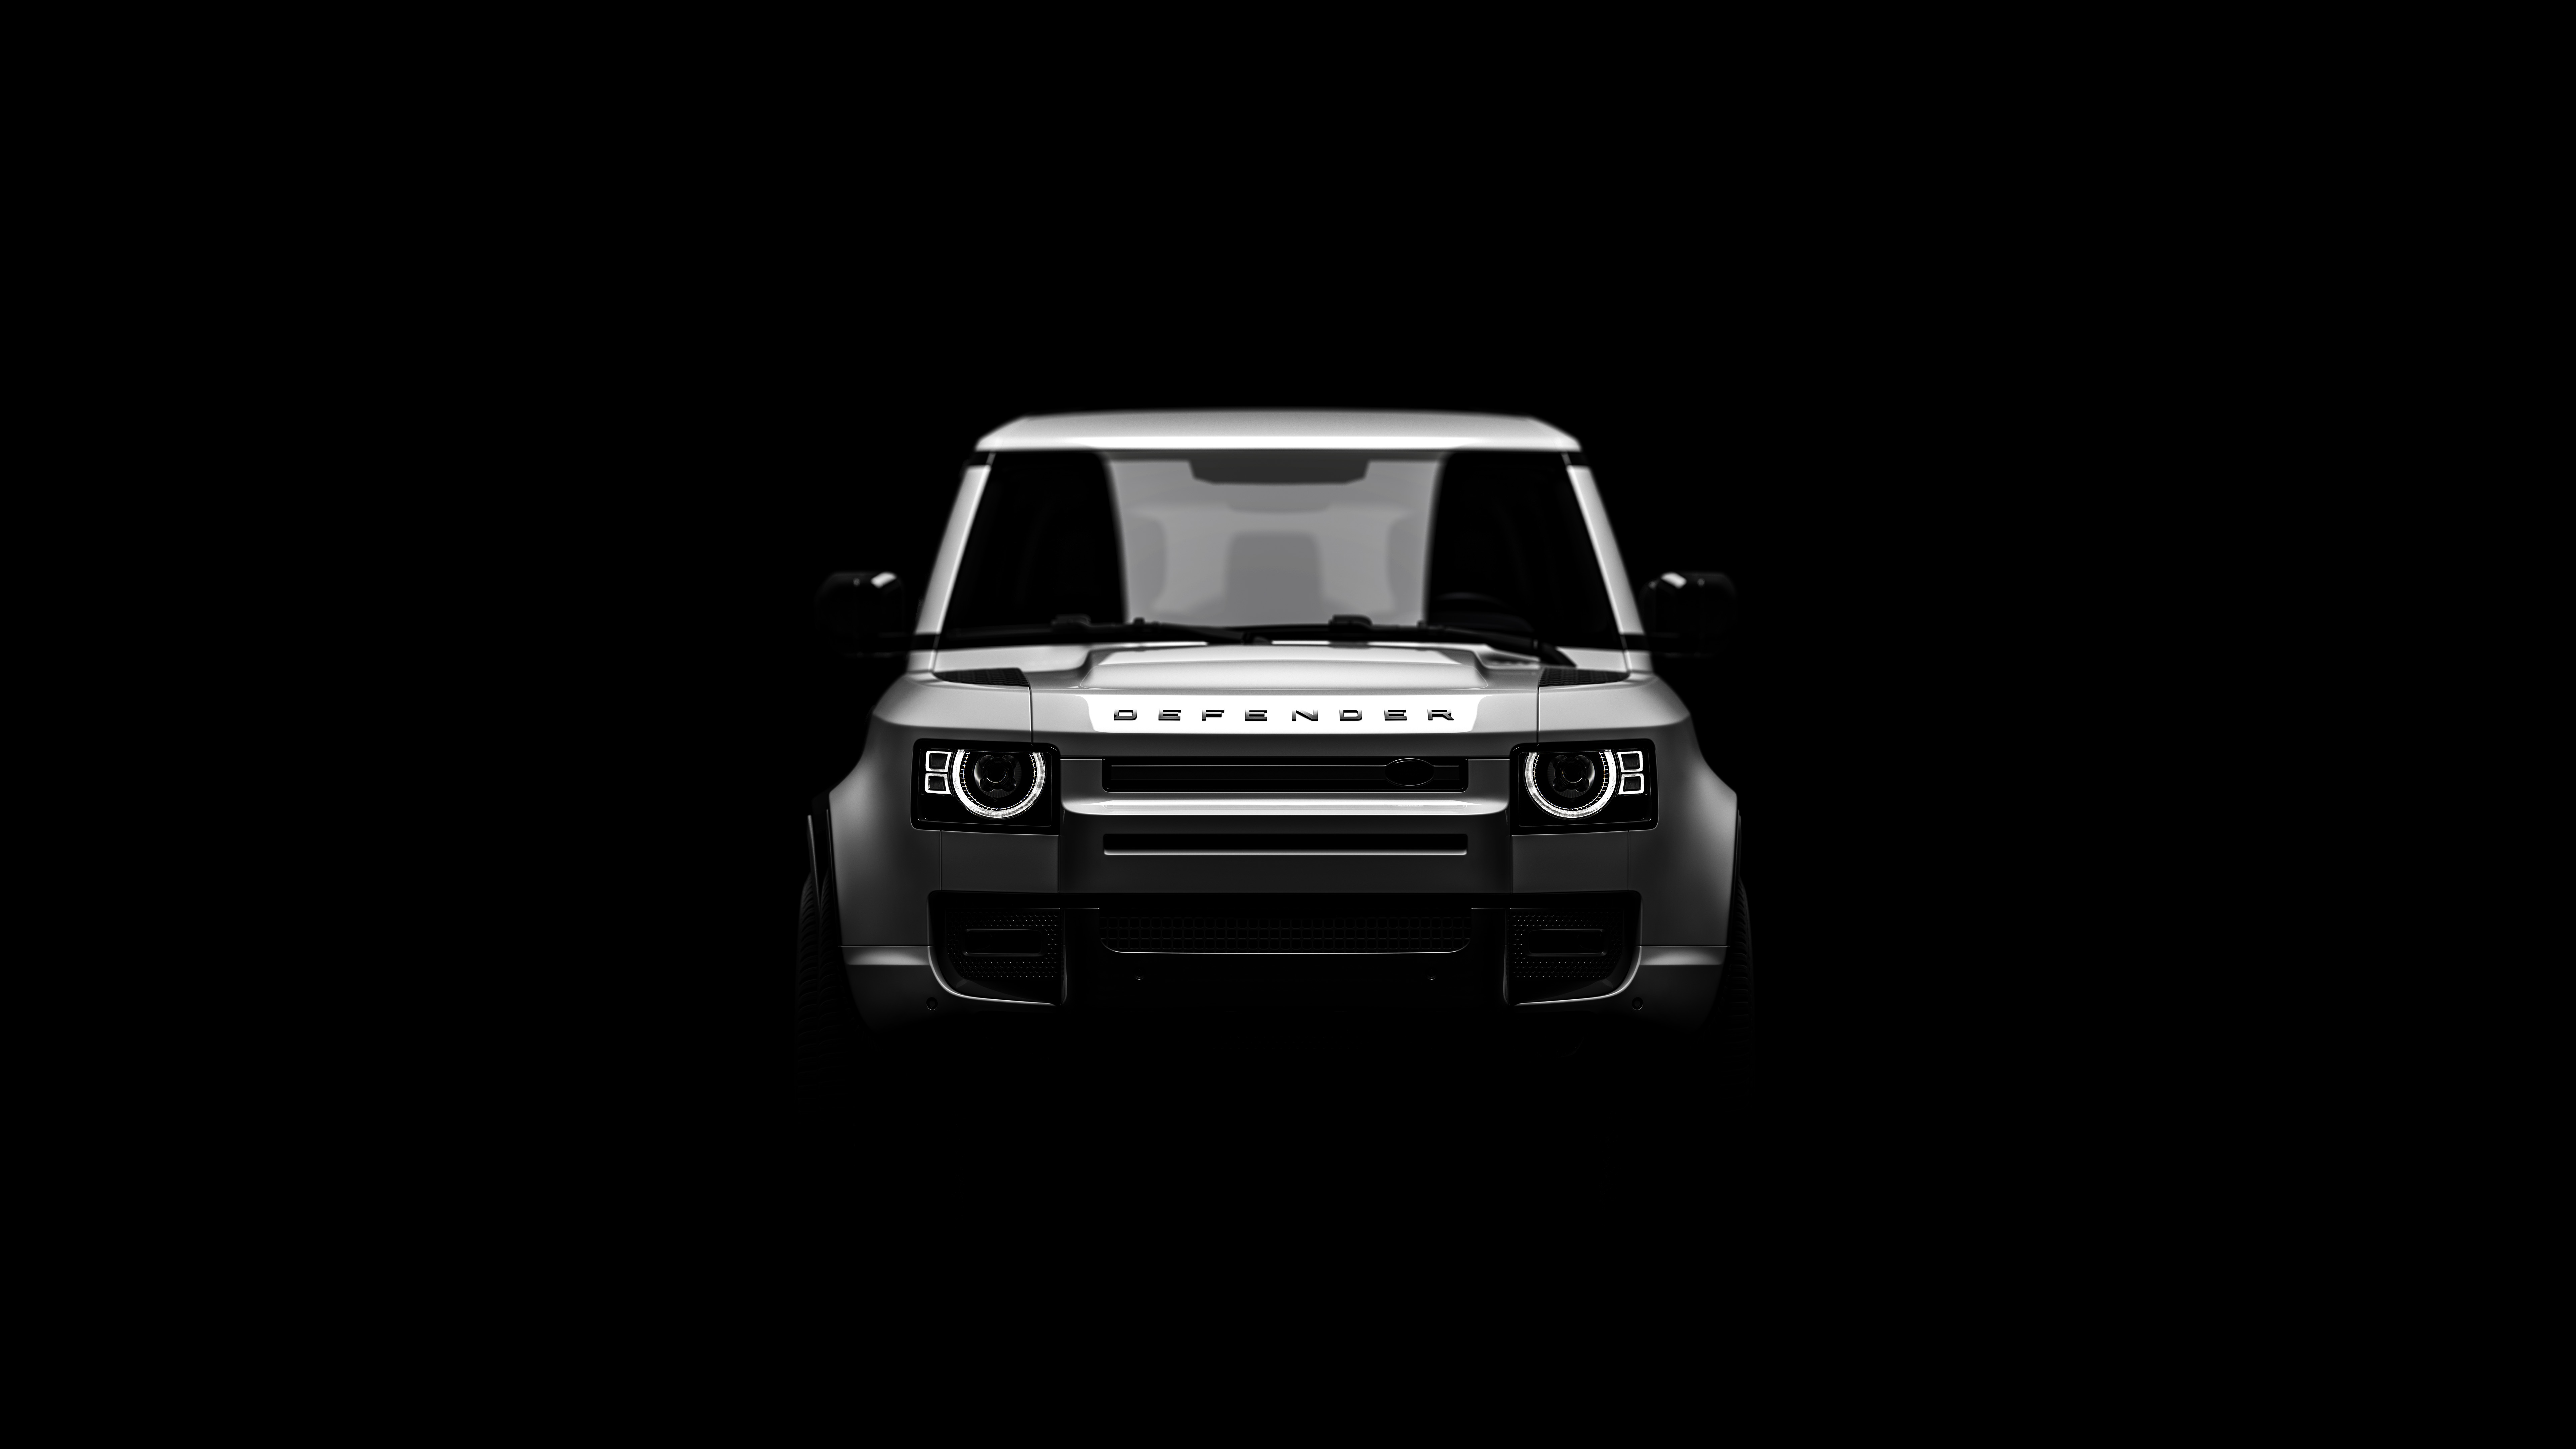 General 7680x4320 Land Rover Land Rover Defender car vehicle offroad minimalism British cars SUV simple background low light frontal view dark